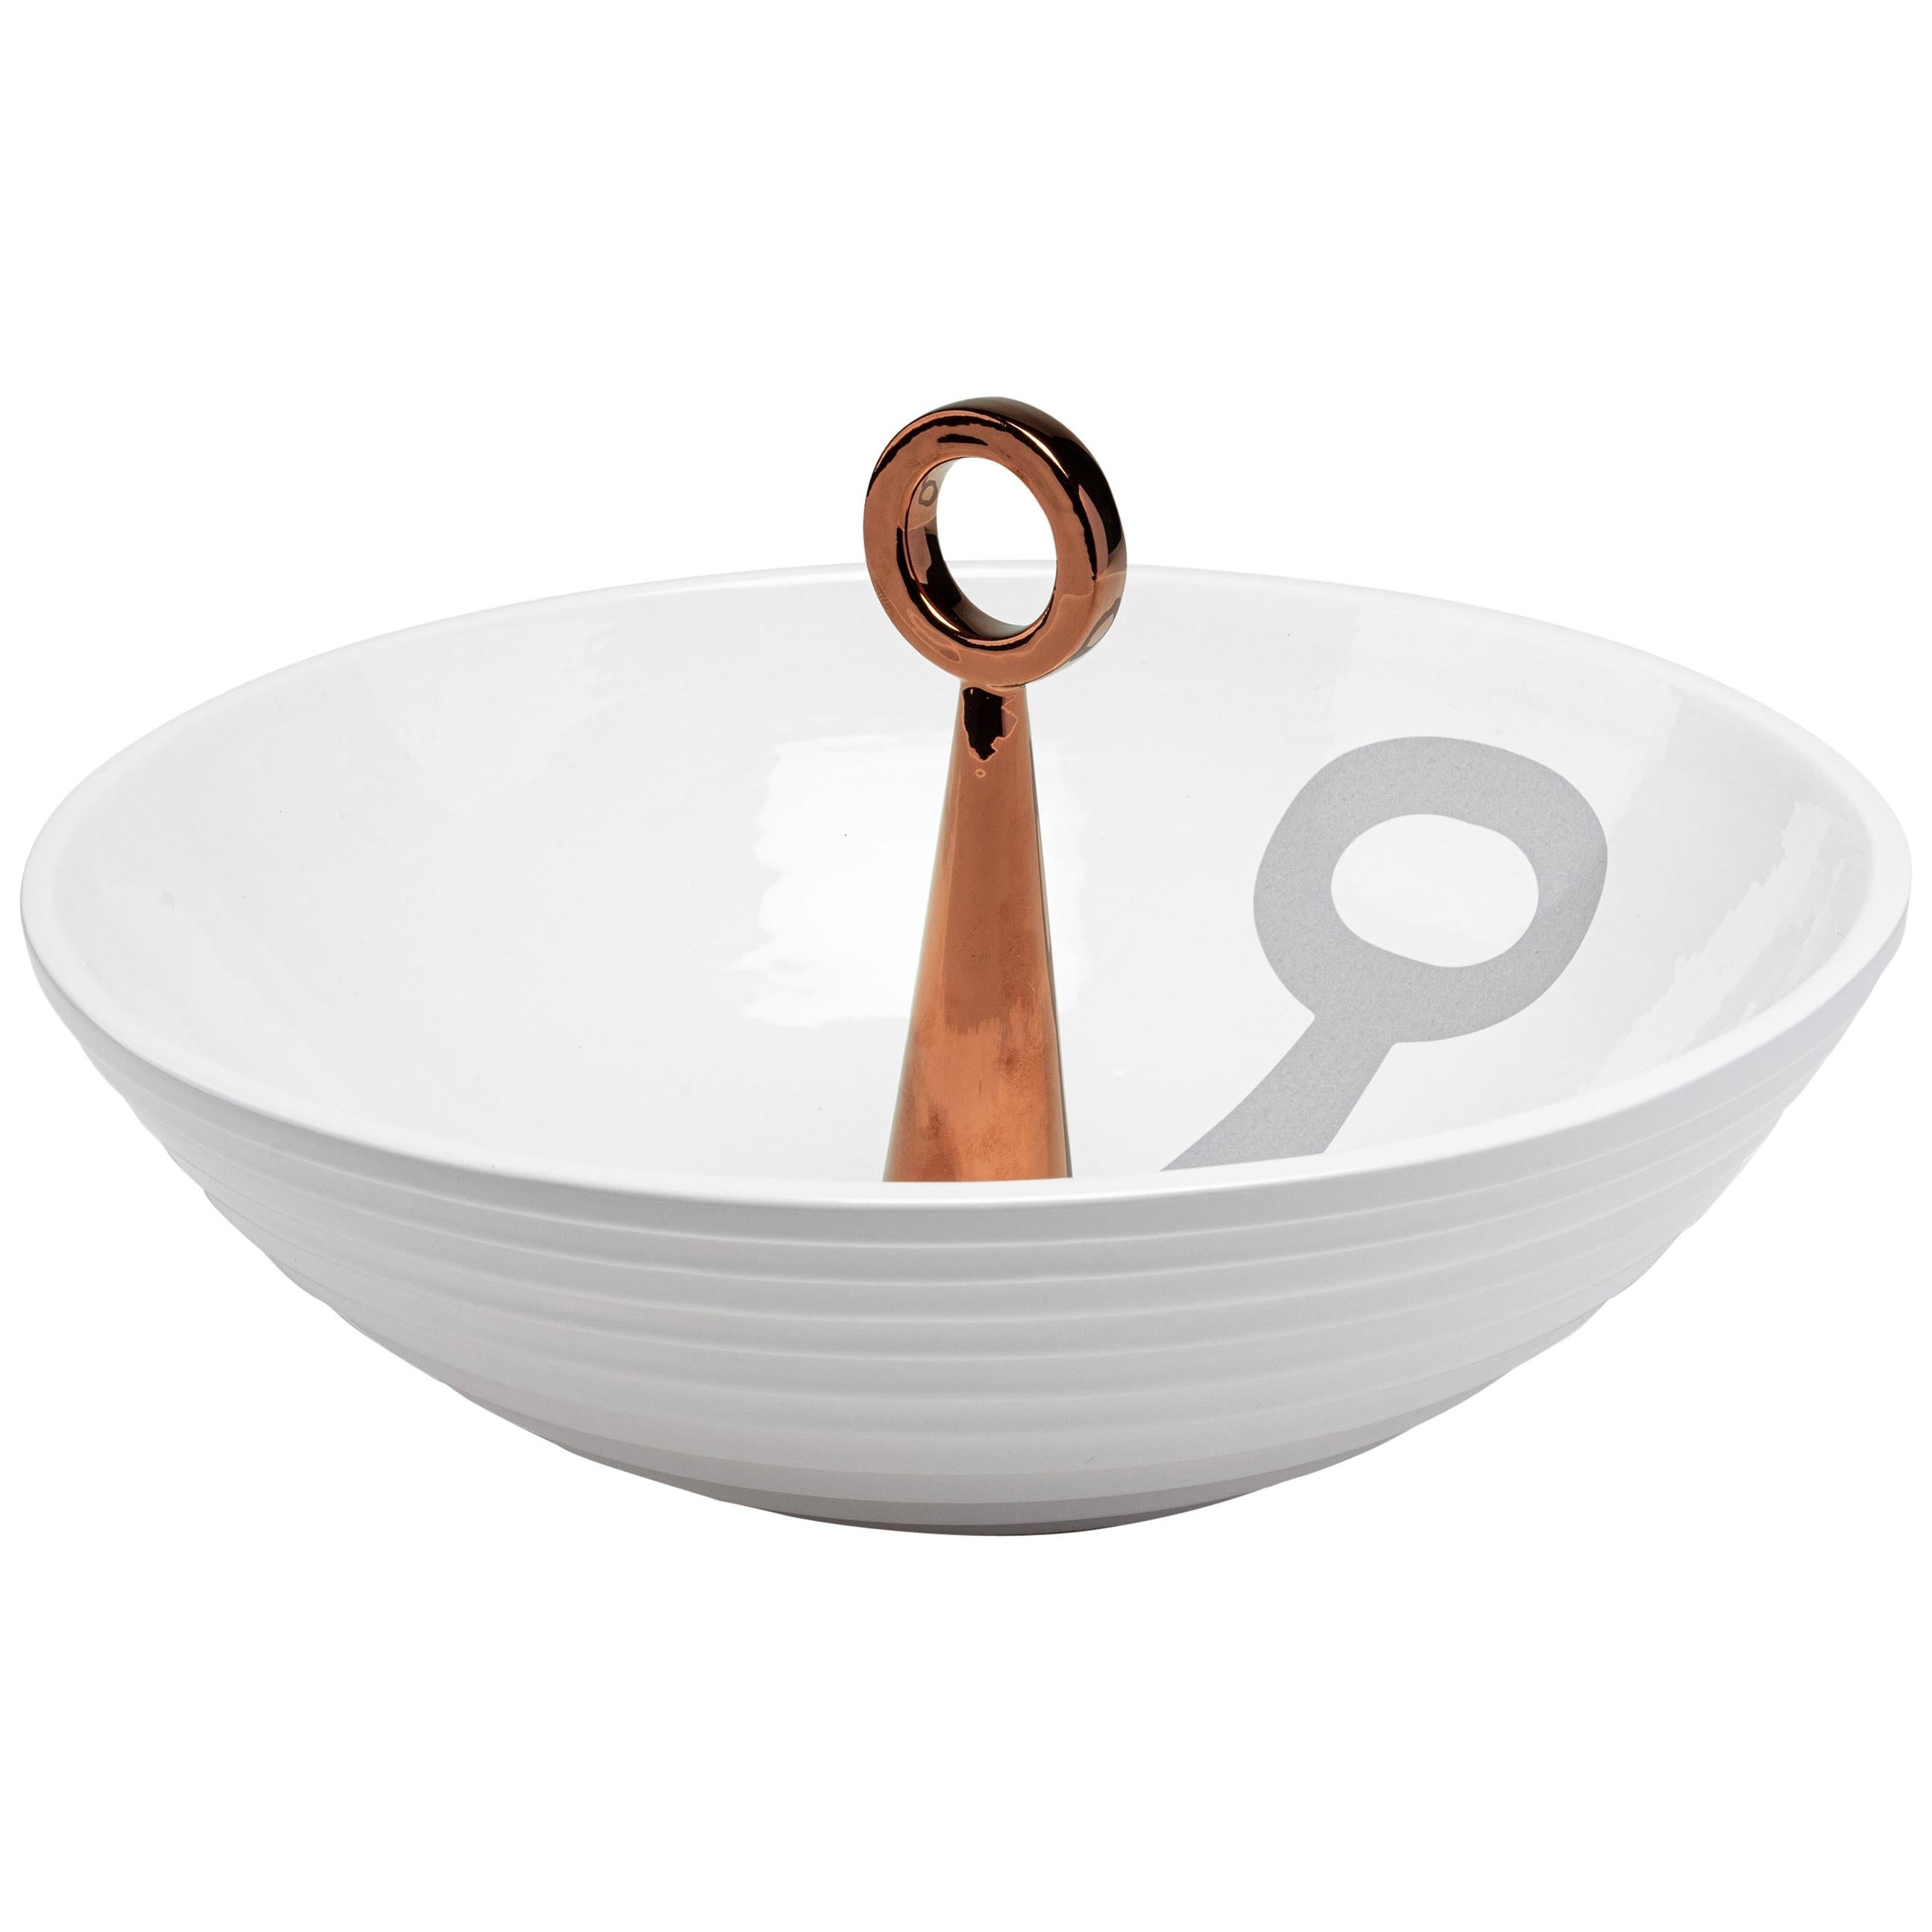 12:30_ White Ceramic and Copper Details Handcrafted Bowl